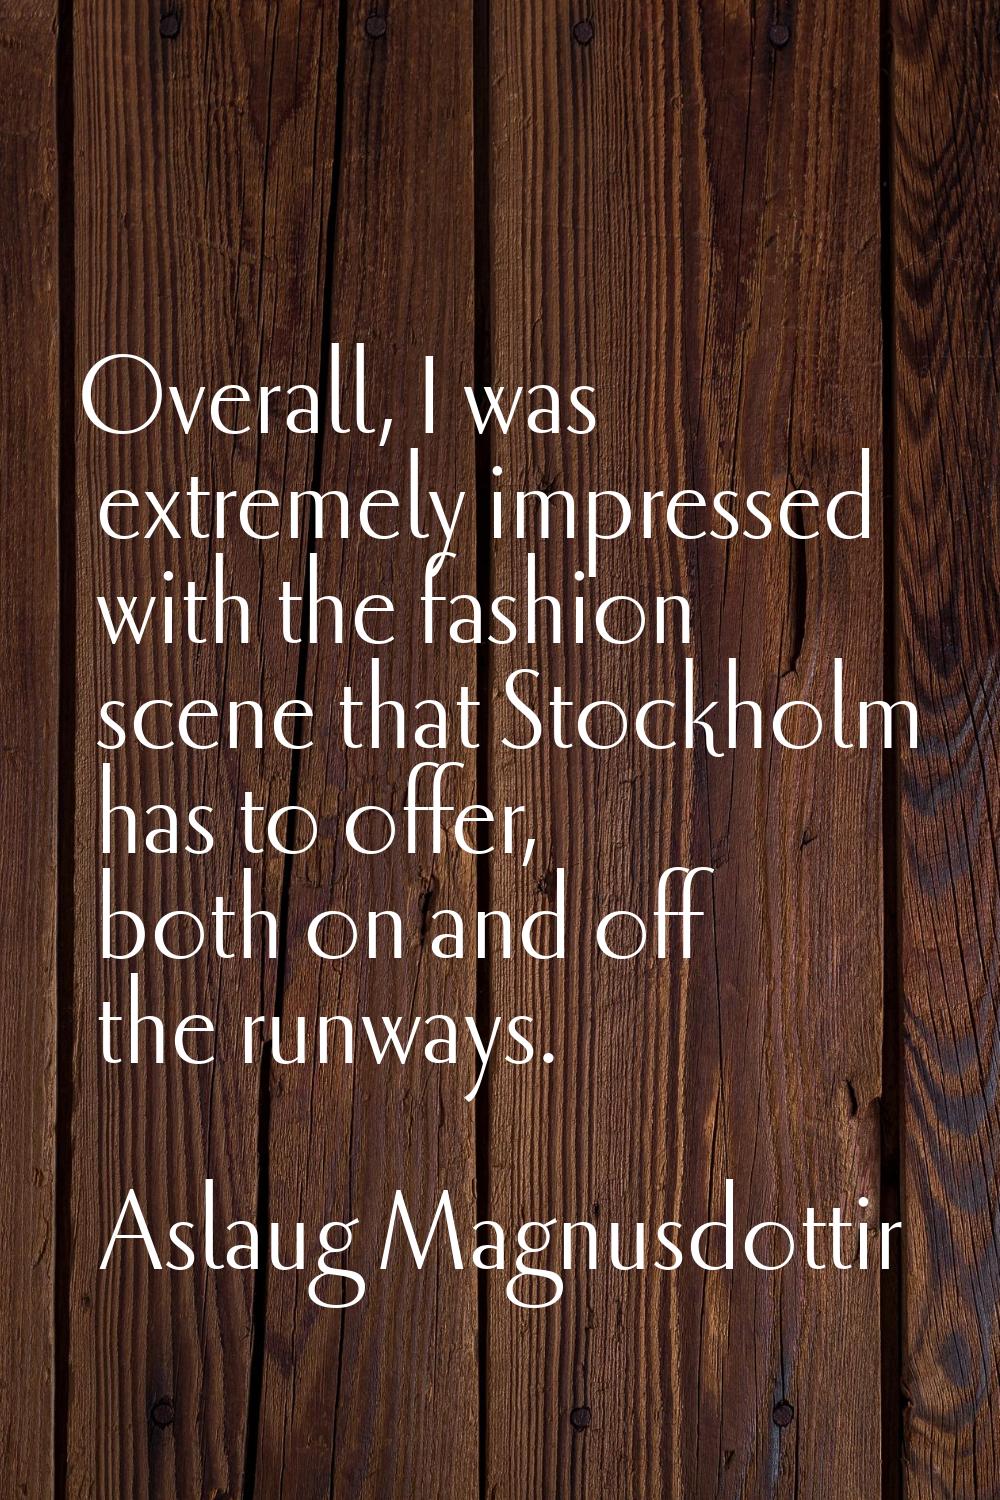 Overall, I was extremely impressed with the fashion scene that Stockholm has to offer, both on and 